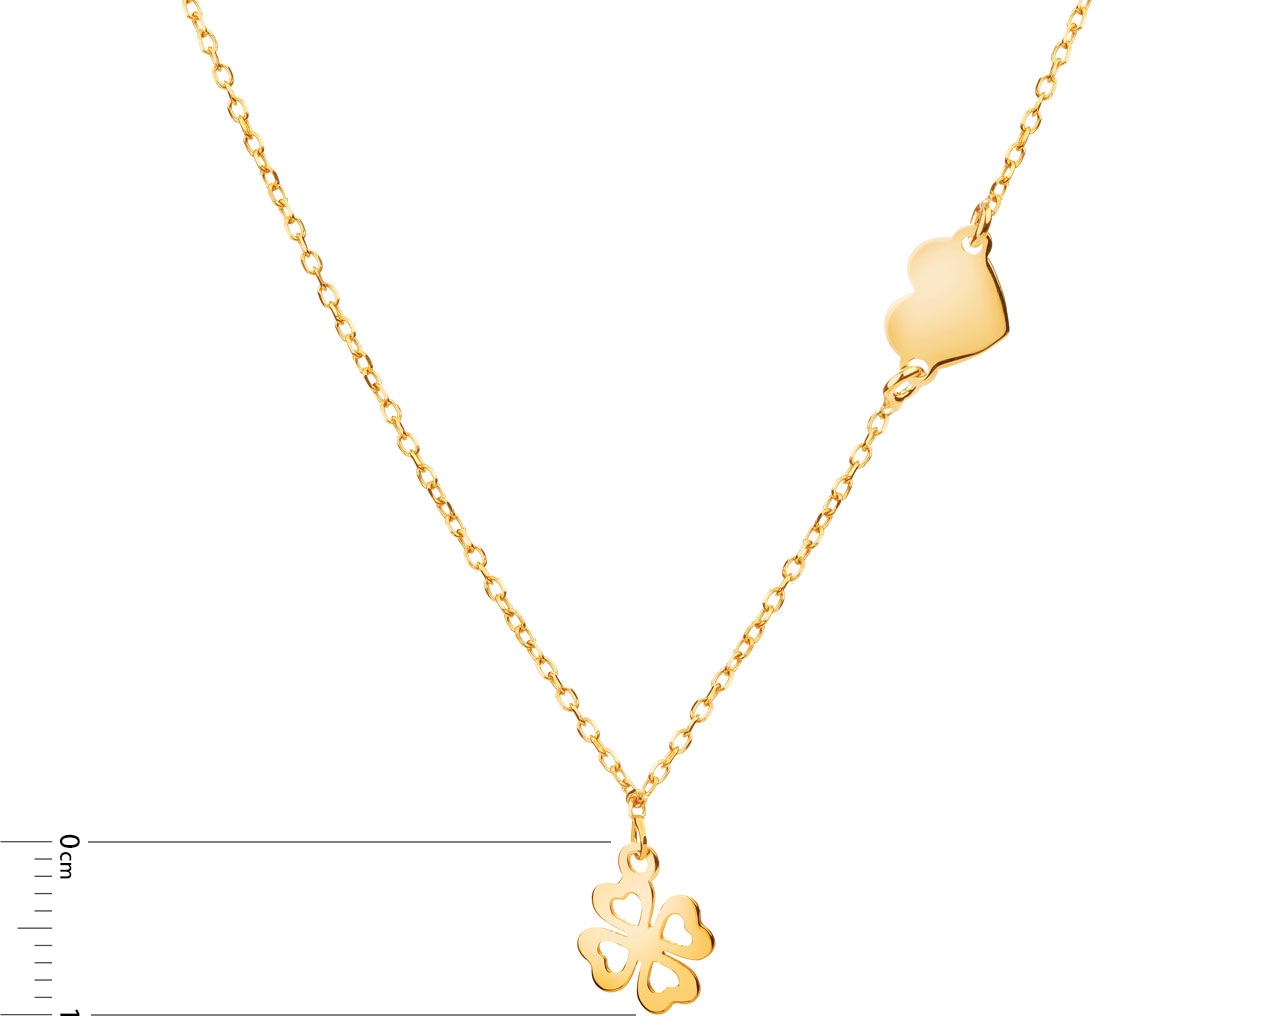 Gold Plated Leaf Design Pendant Necklace Chain for Women Girls